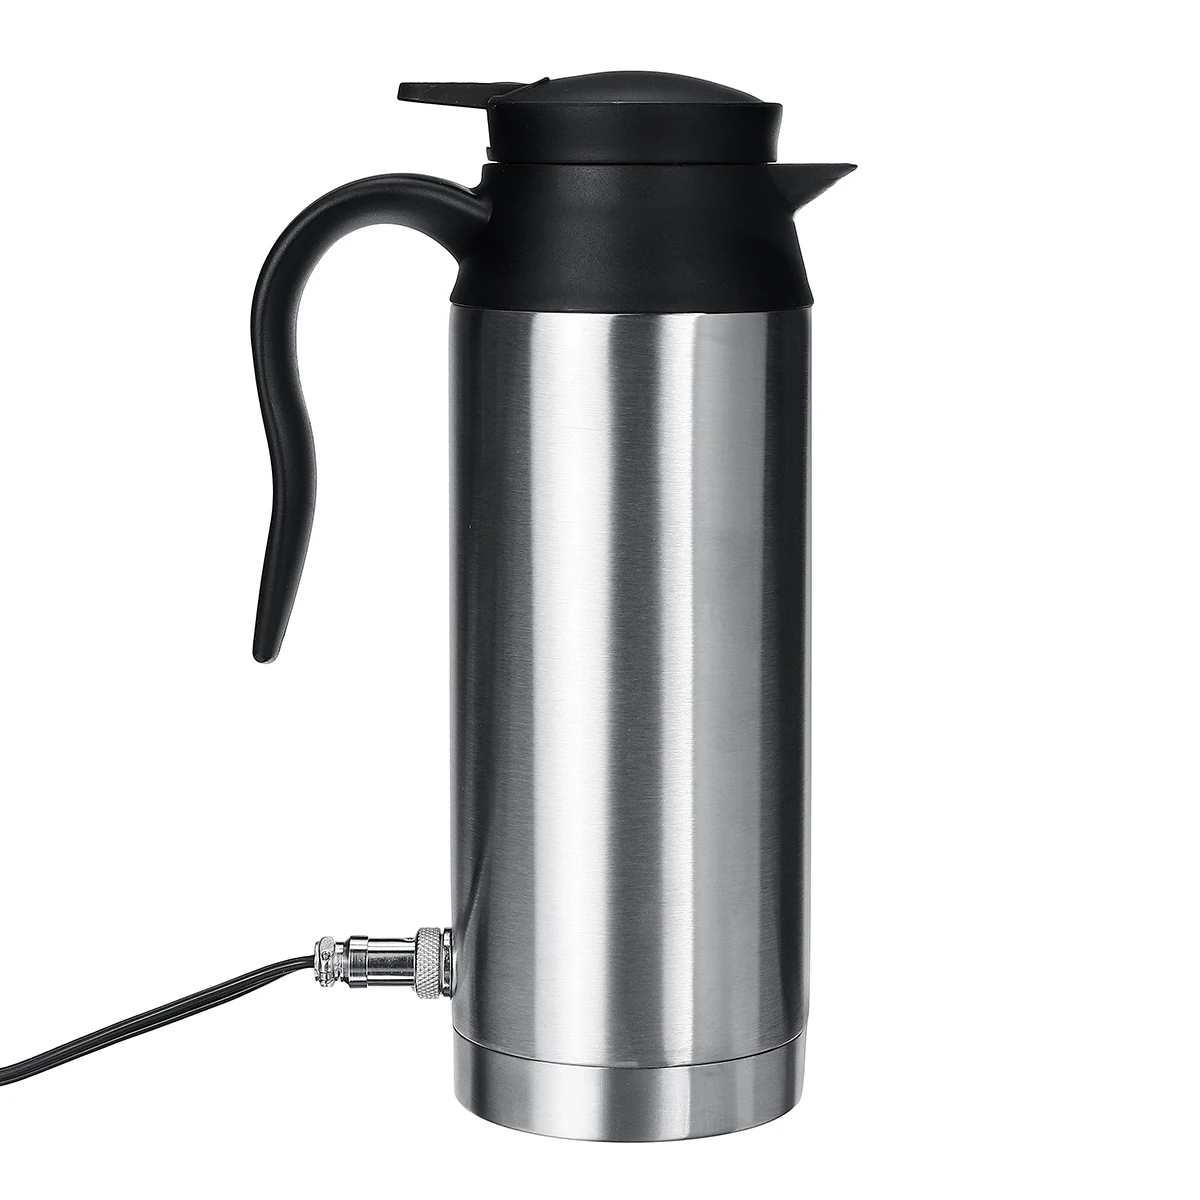 

12V /24V 800ml Stainless Steel Electric Kettle In-Car Travel Trip Coffee Tea Heated Mug Motor Hot Water Boiling for Car Truck